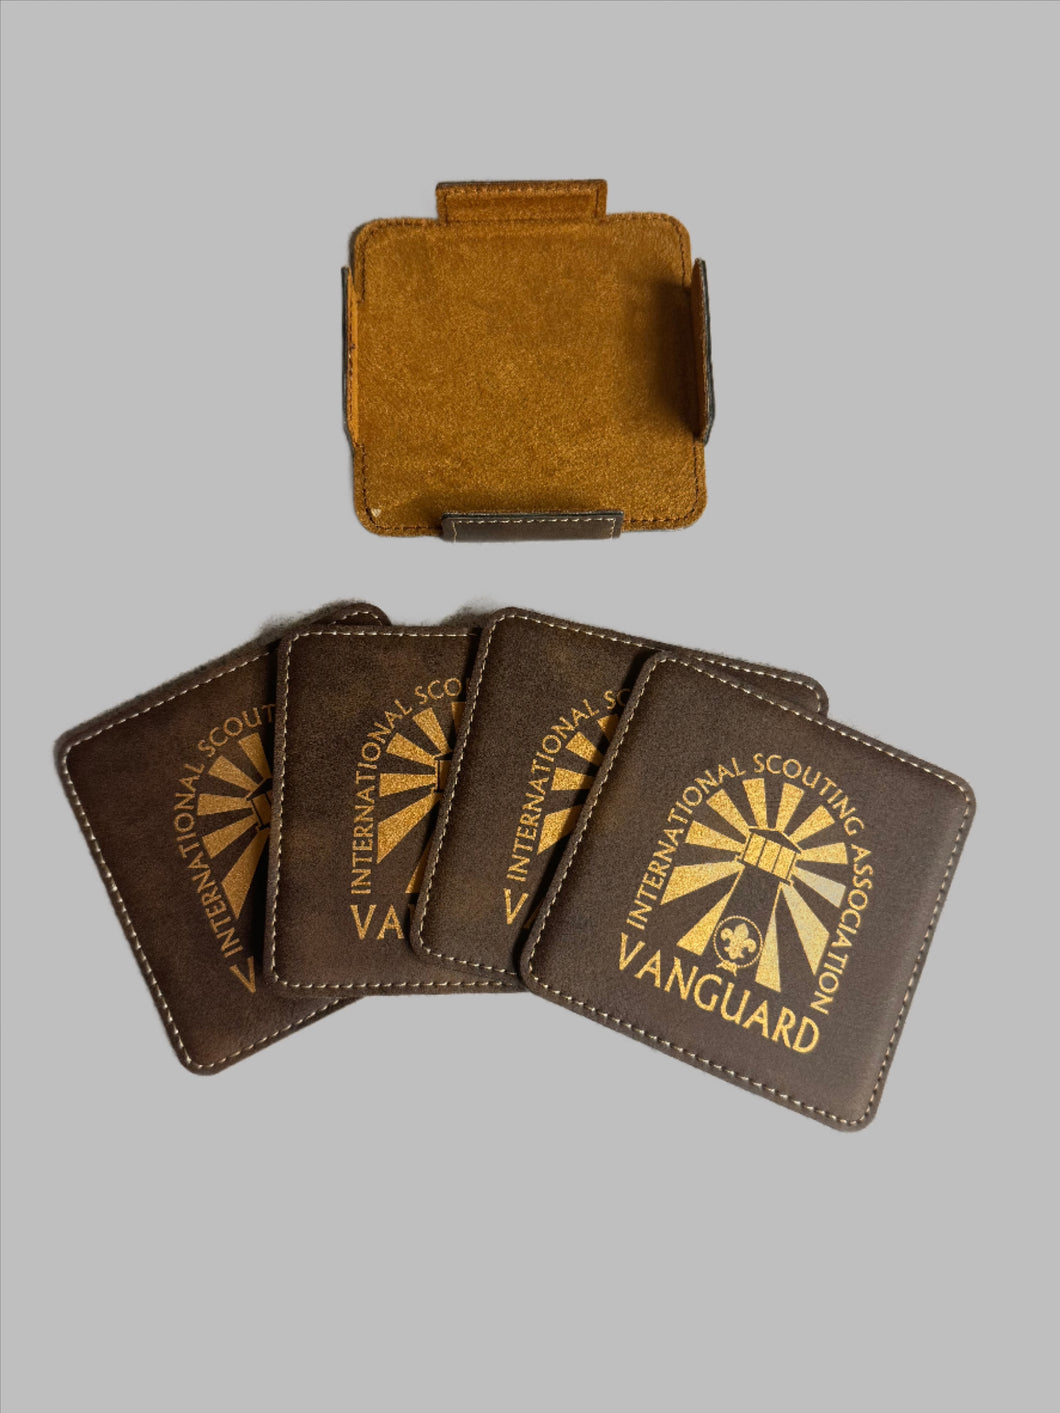 Set of 4 Leather Coasters with logo of Vanguard International Scouting Association